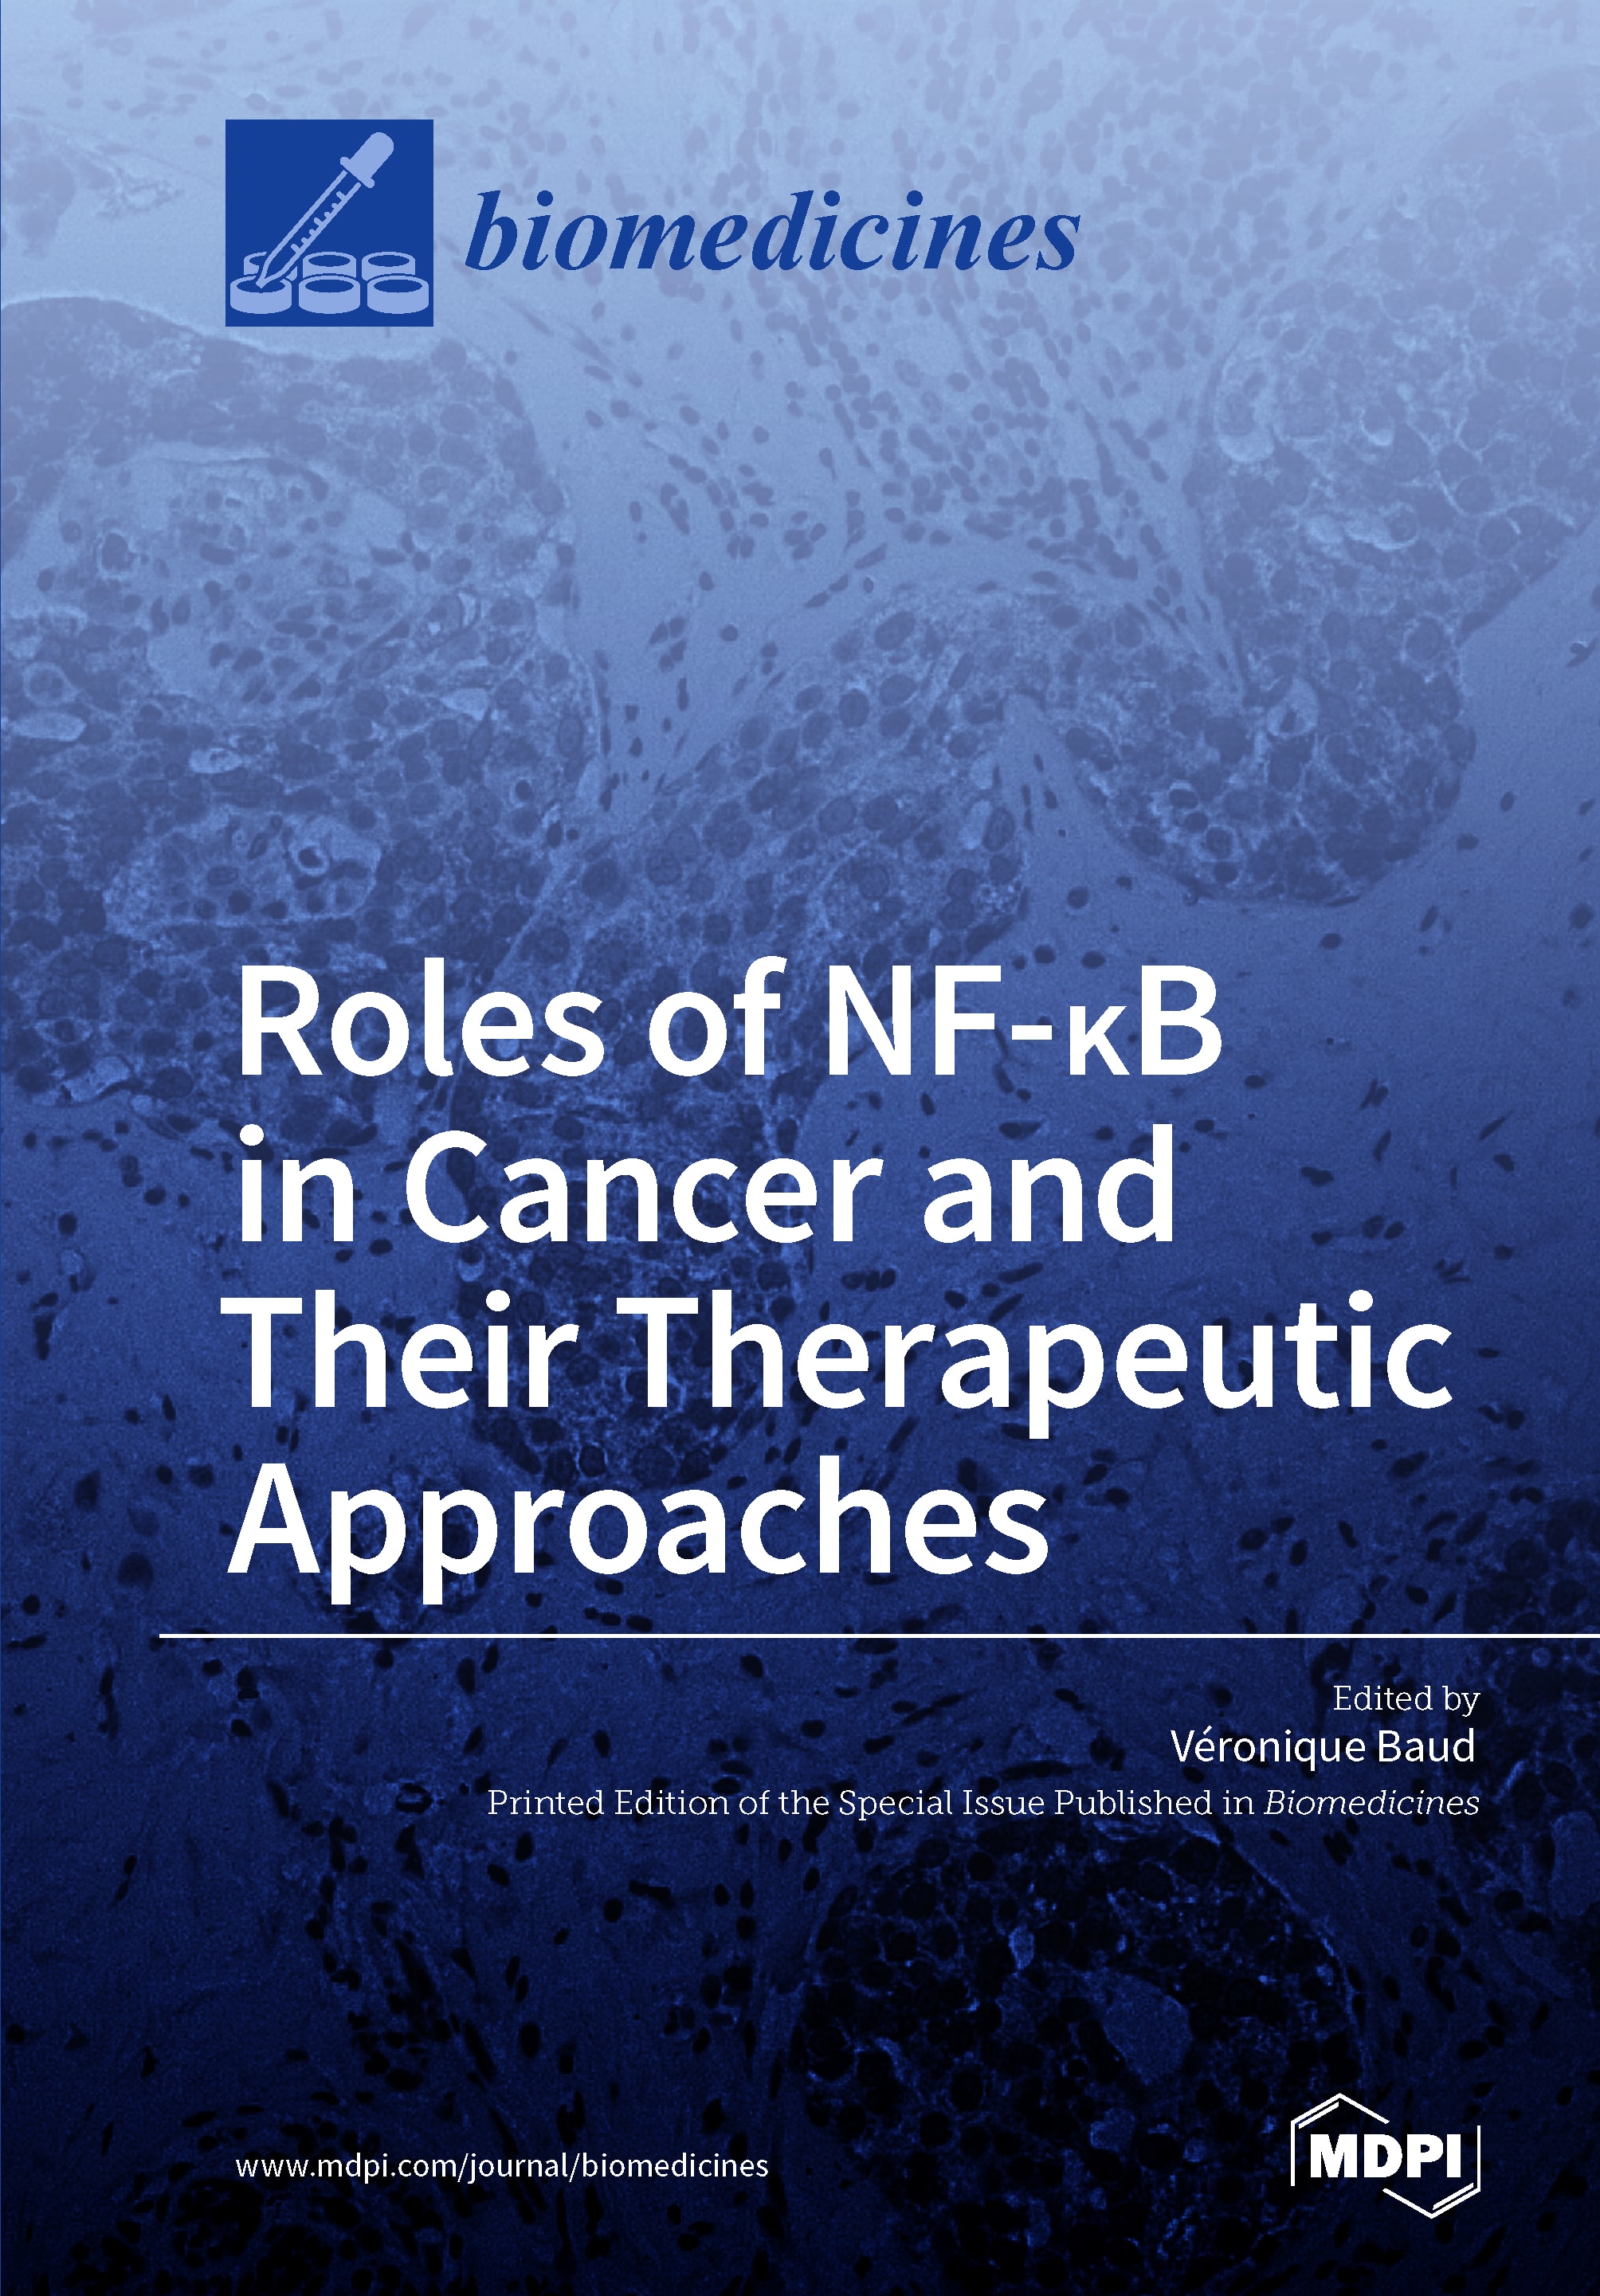 Roles of NF-κB in Cancer and Their Therapeutic Approaches